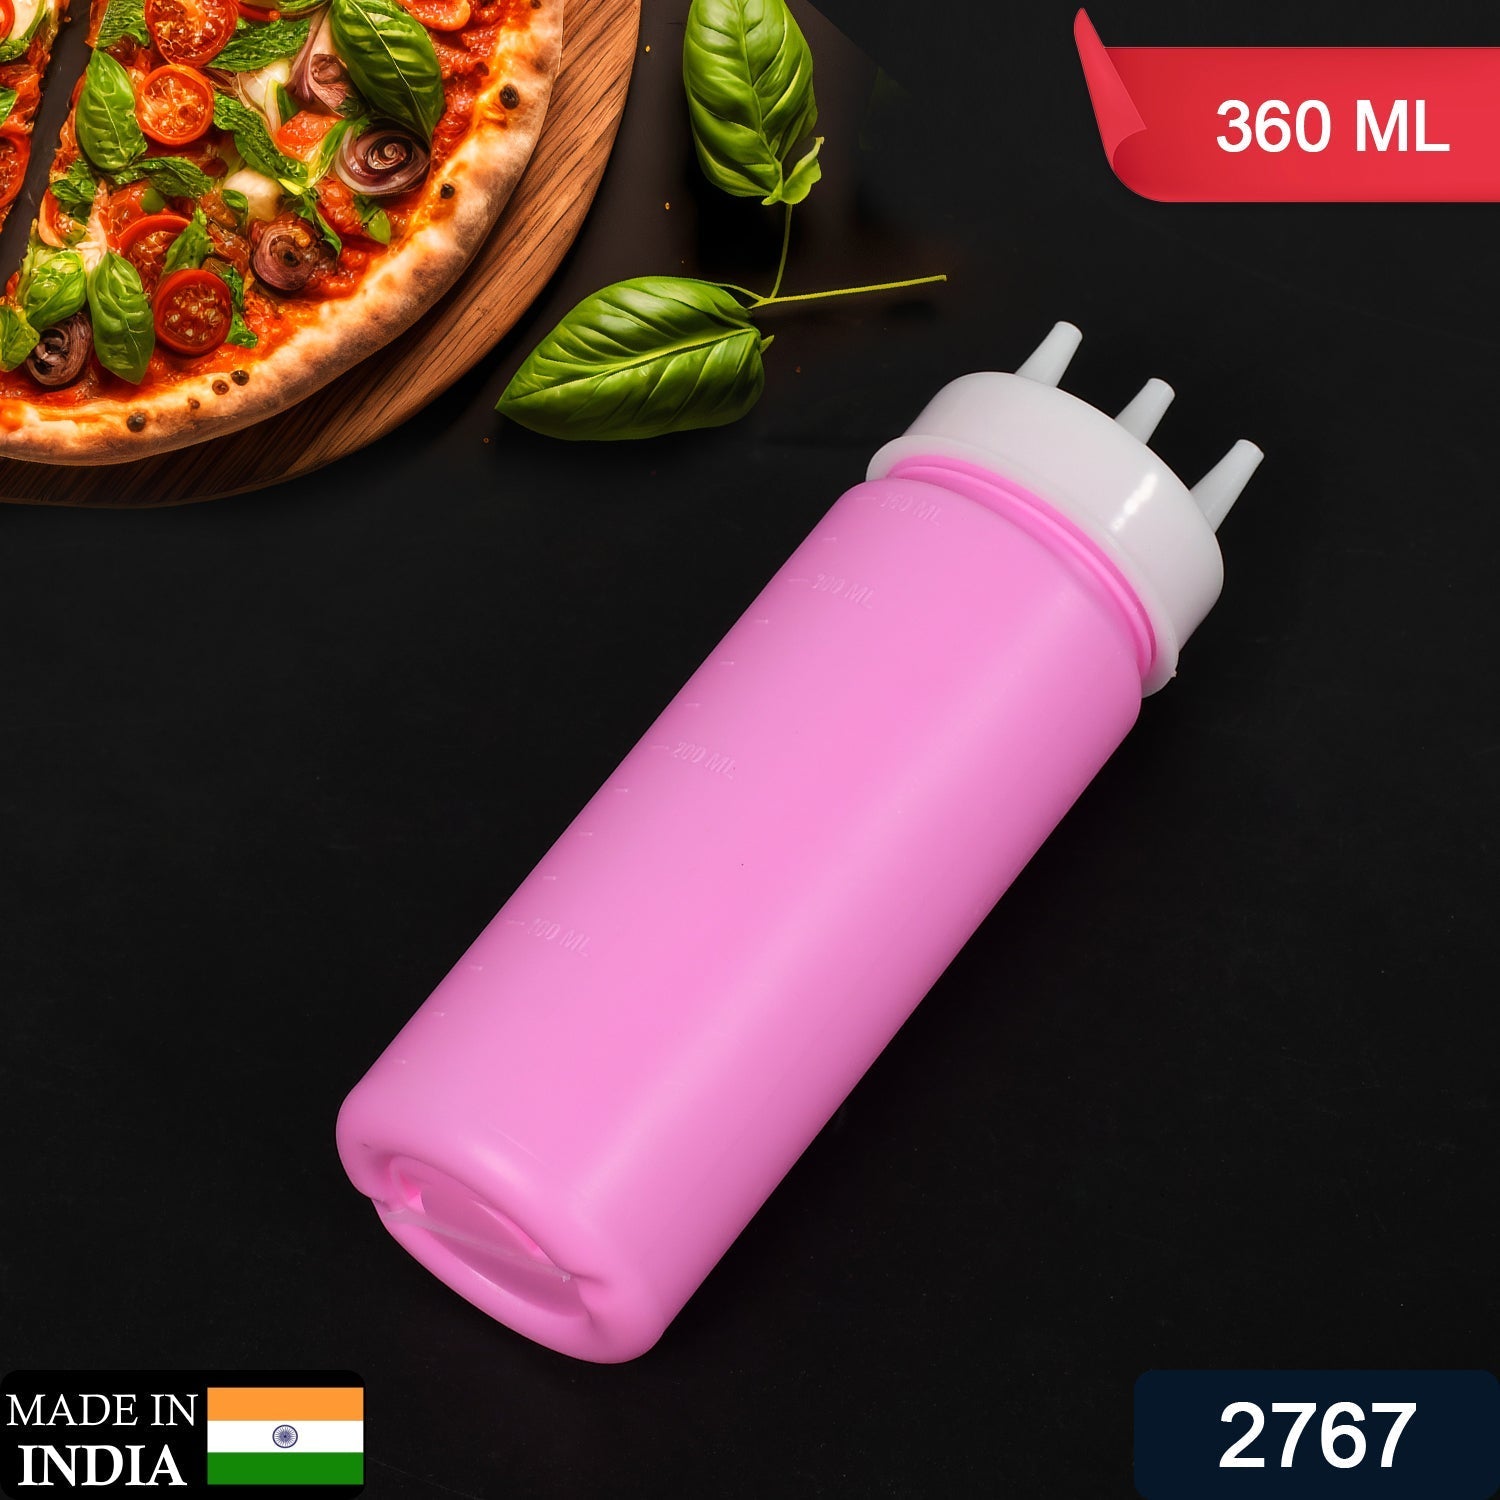 2767 Ketchup Bottles With 3 Nozzle For Sauce, Mayonnaise, Chocolate Syrup Using Bottle Reusable Plastic Bottle ( 360ml ) DeoDap